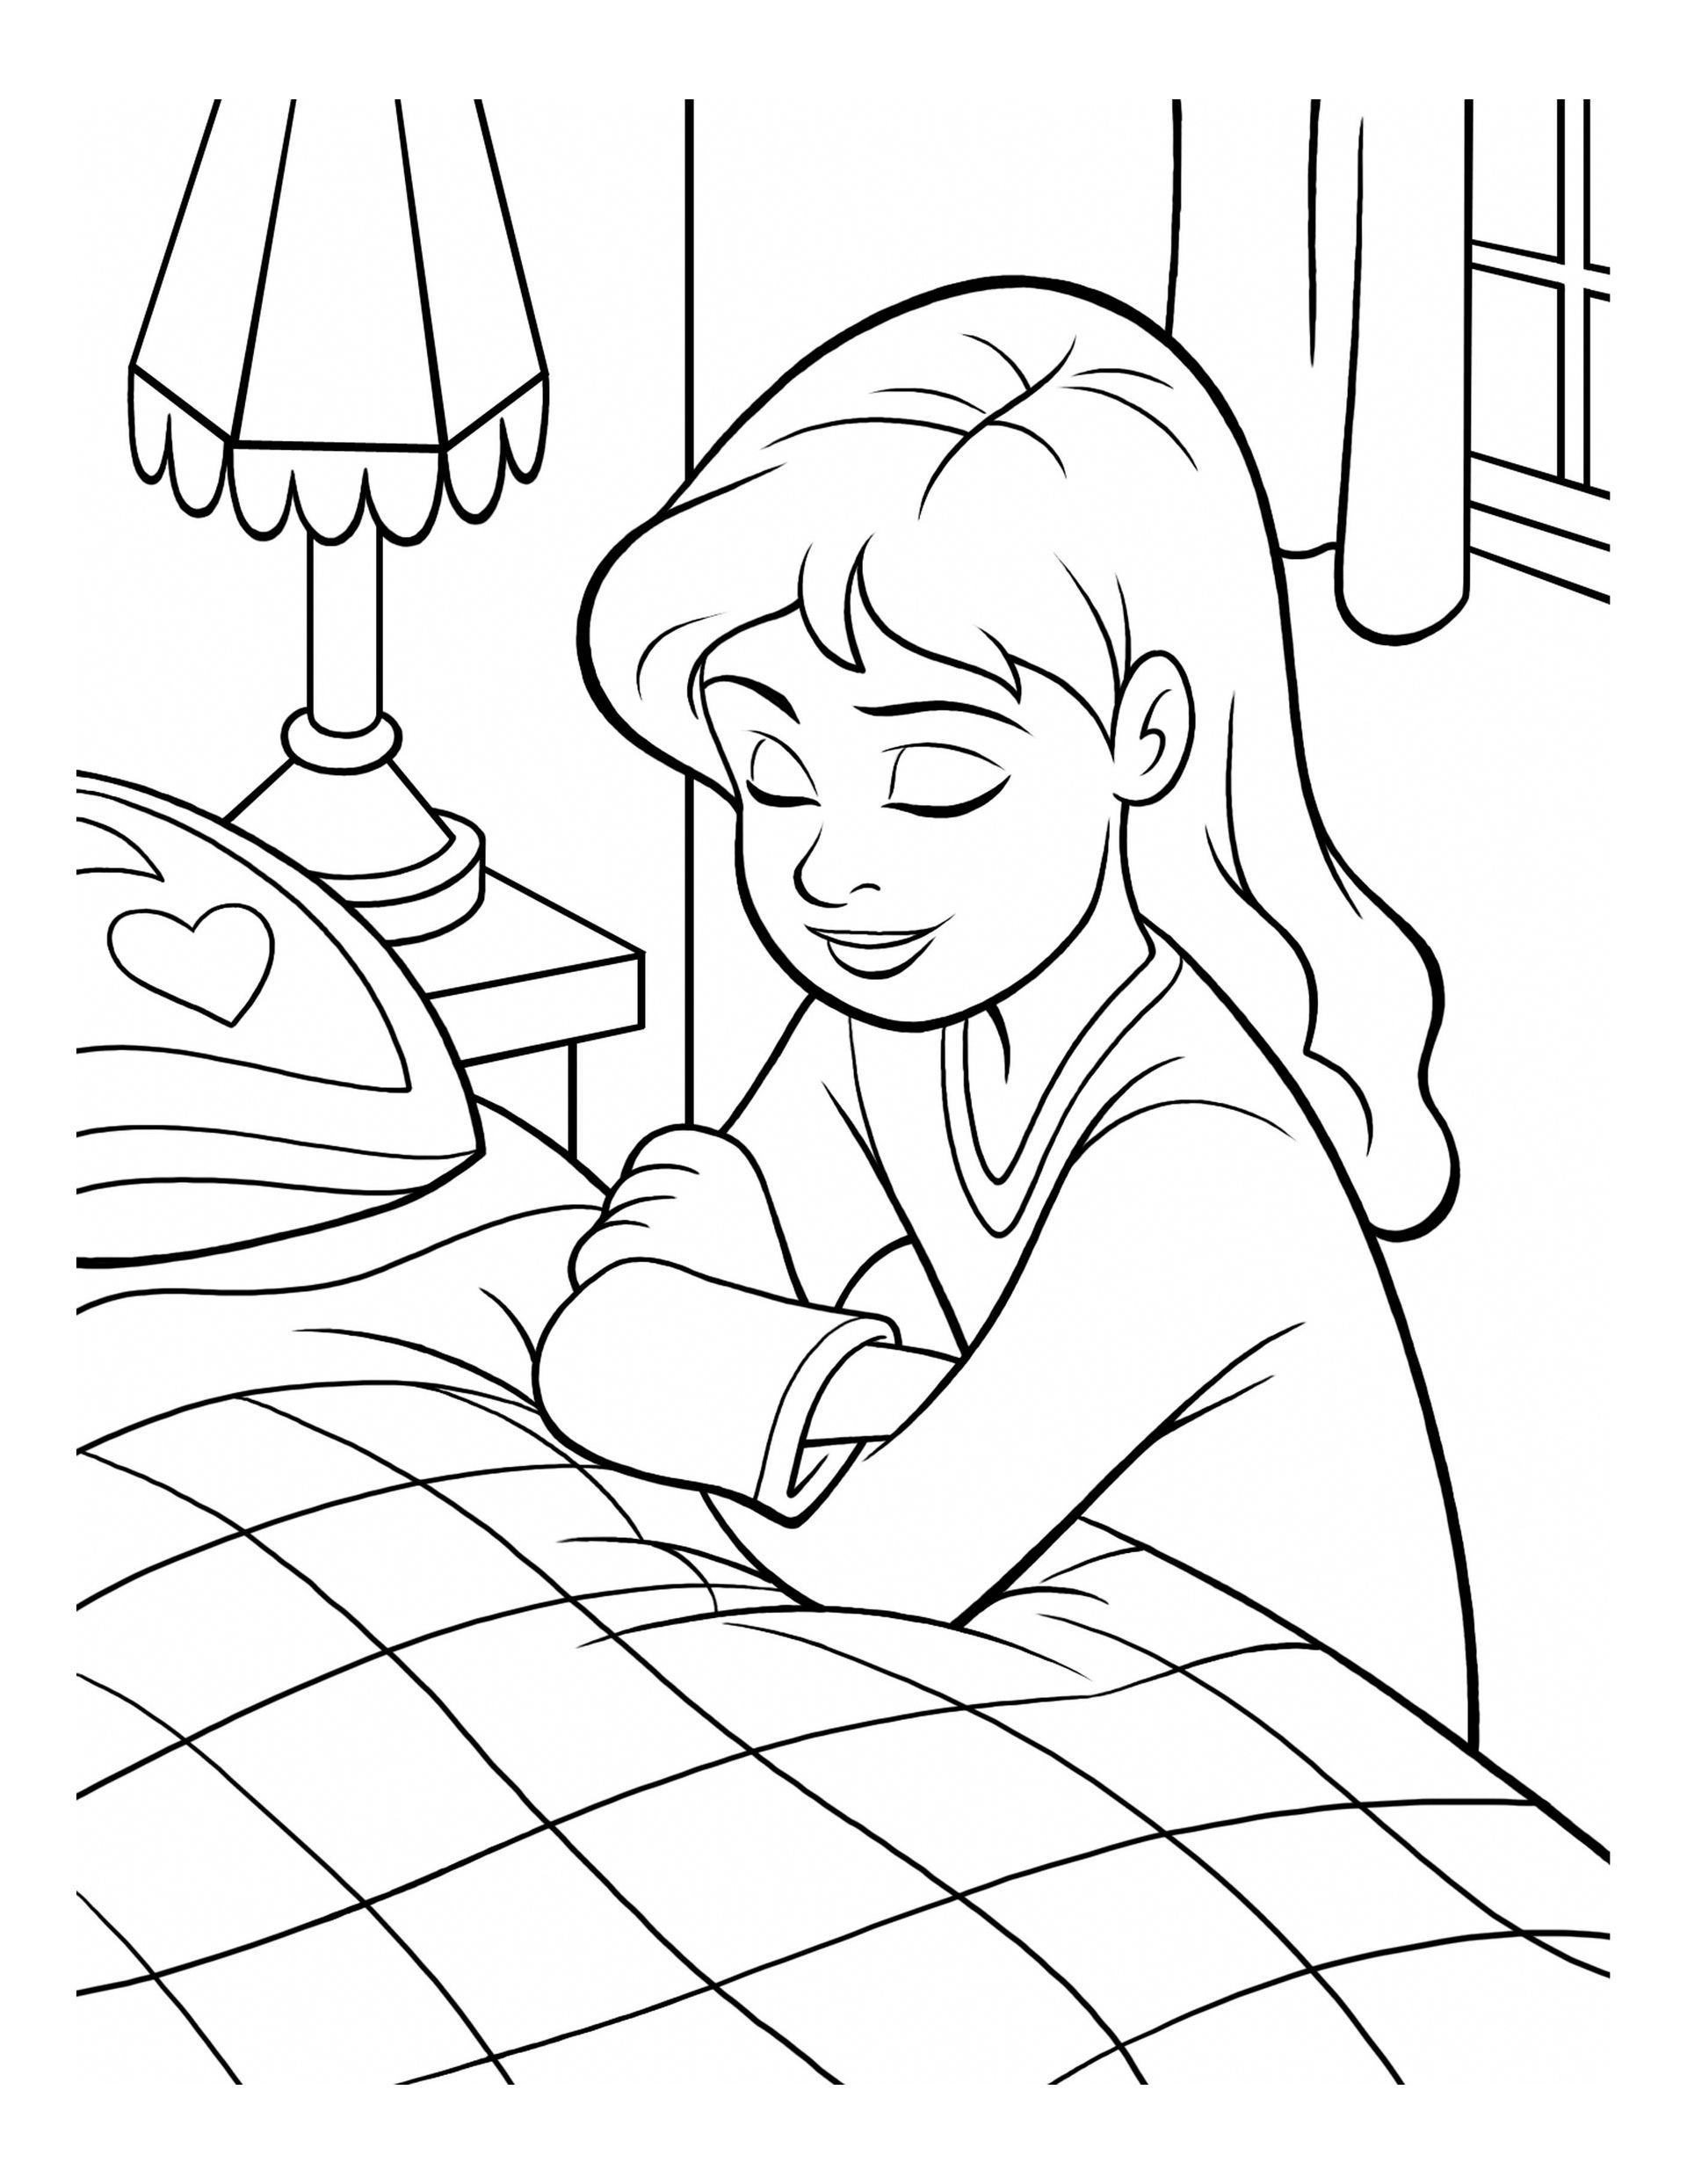 A girl kneels by her bed and prays.